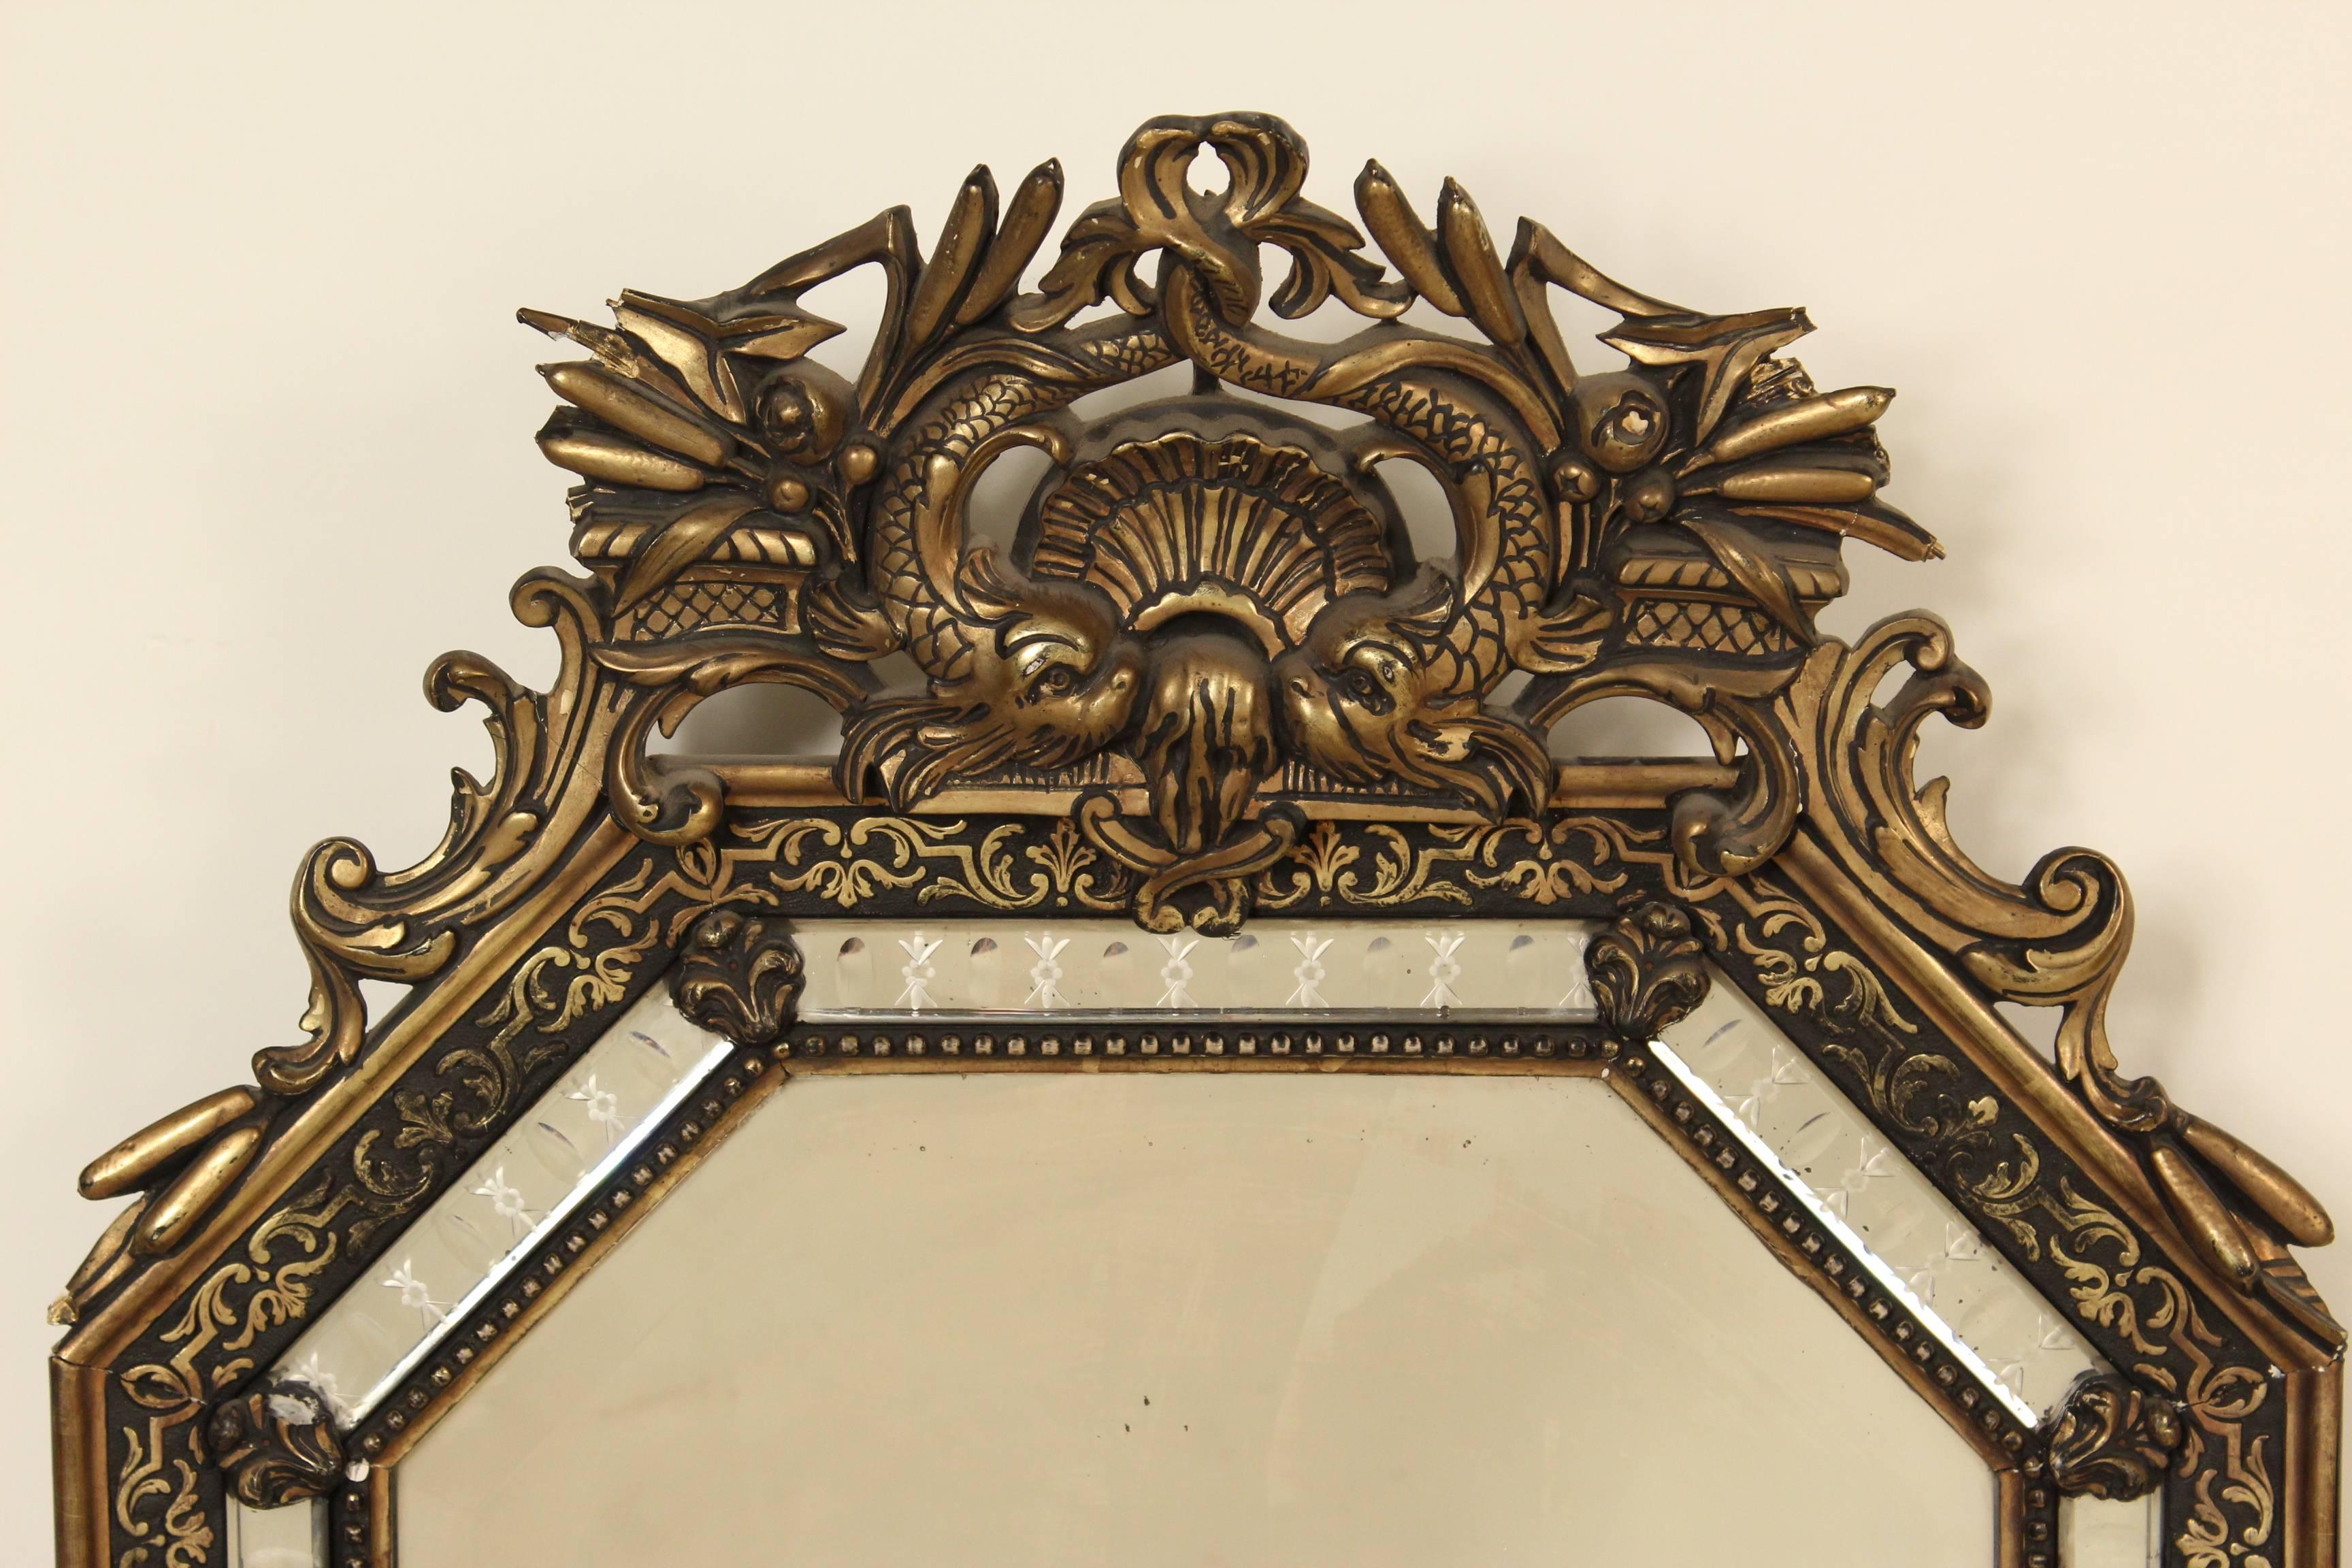 Napoleon III style giltwood octagonal shaped mirror, circa 1900. This mirror has an interesting pediment with dolphins and an etched glass outer glass border.